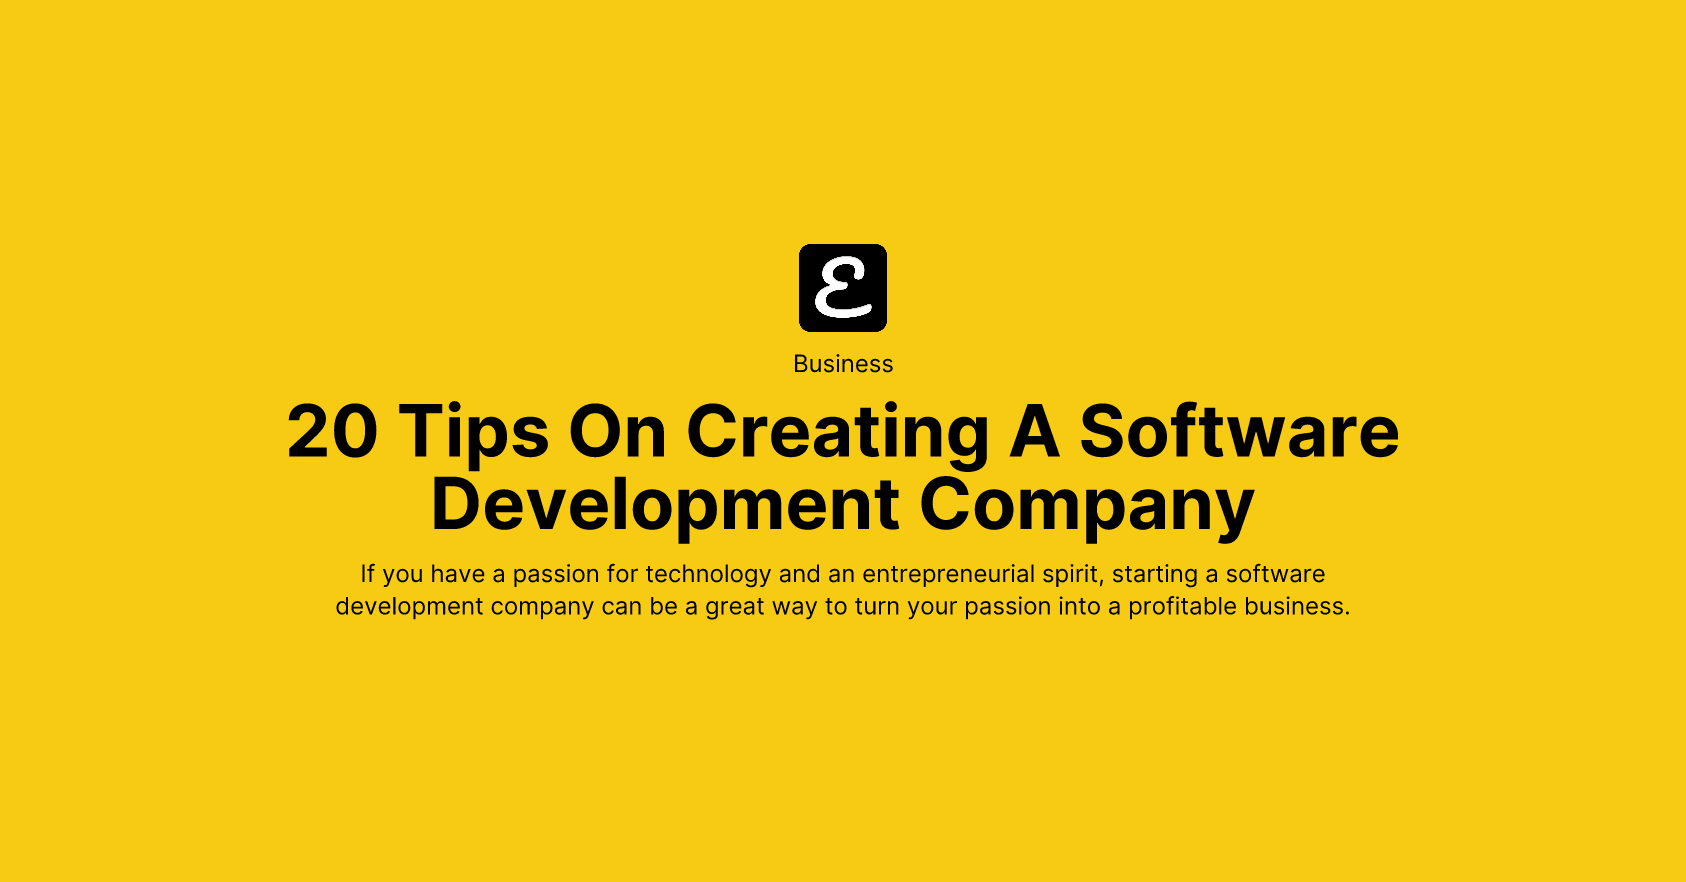 20 Tips On Creating A Software Development Company by Eric David Smith